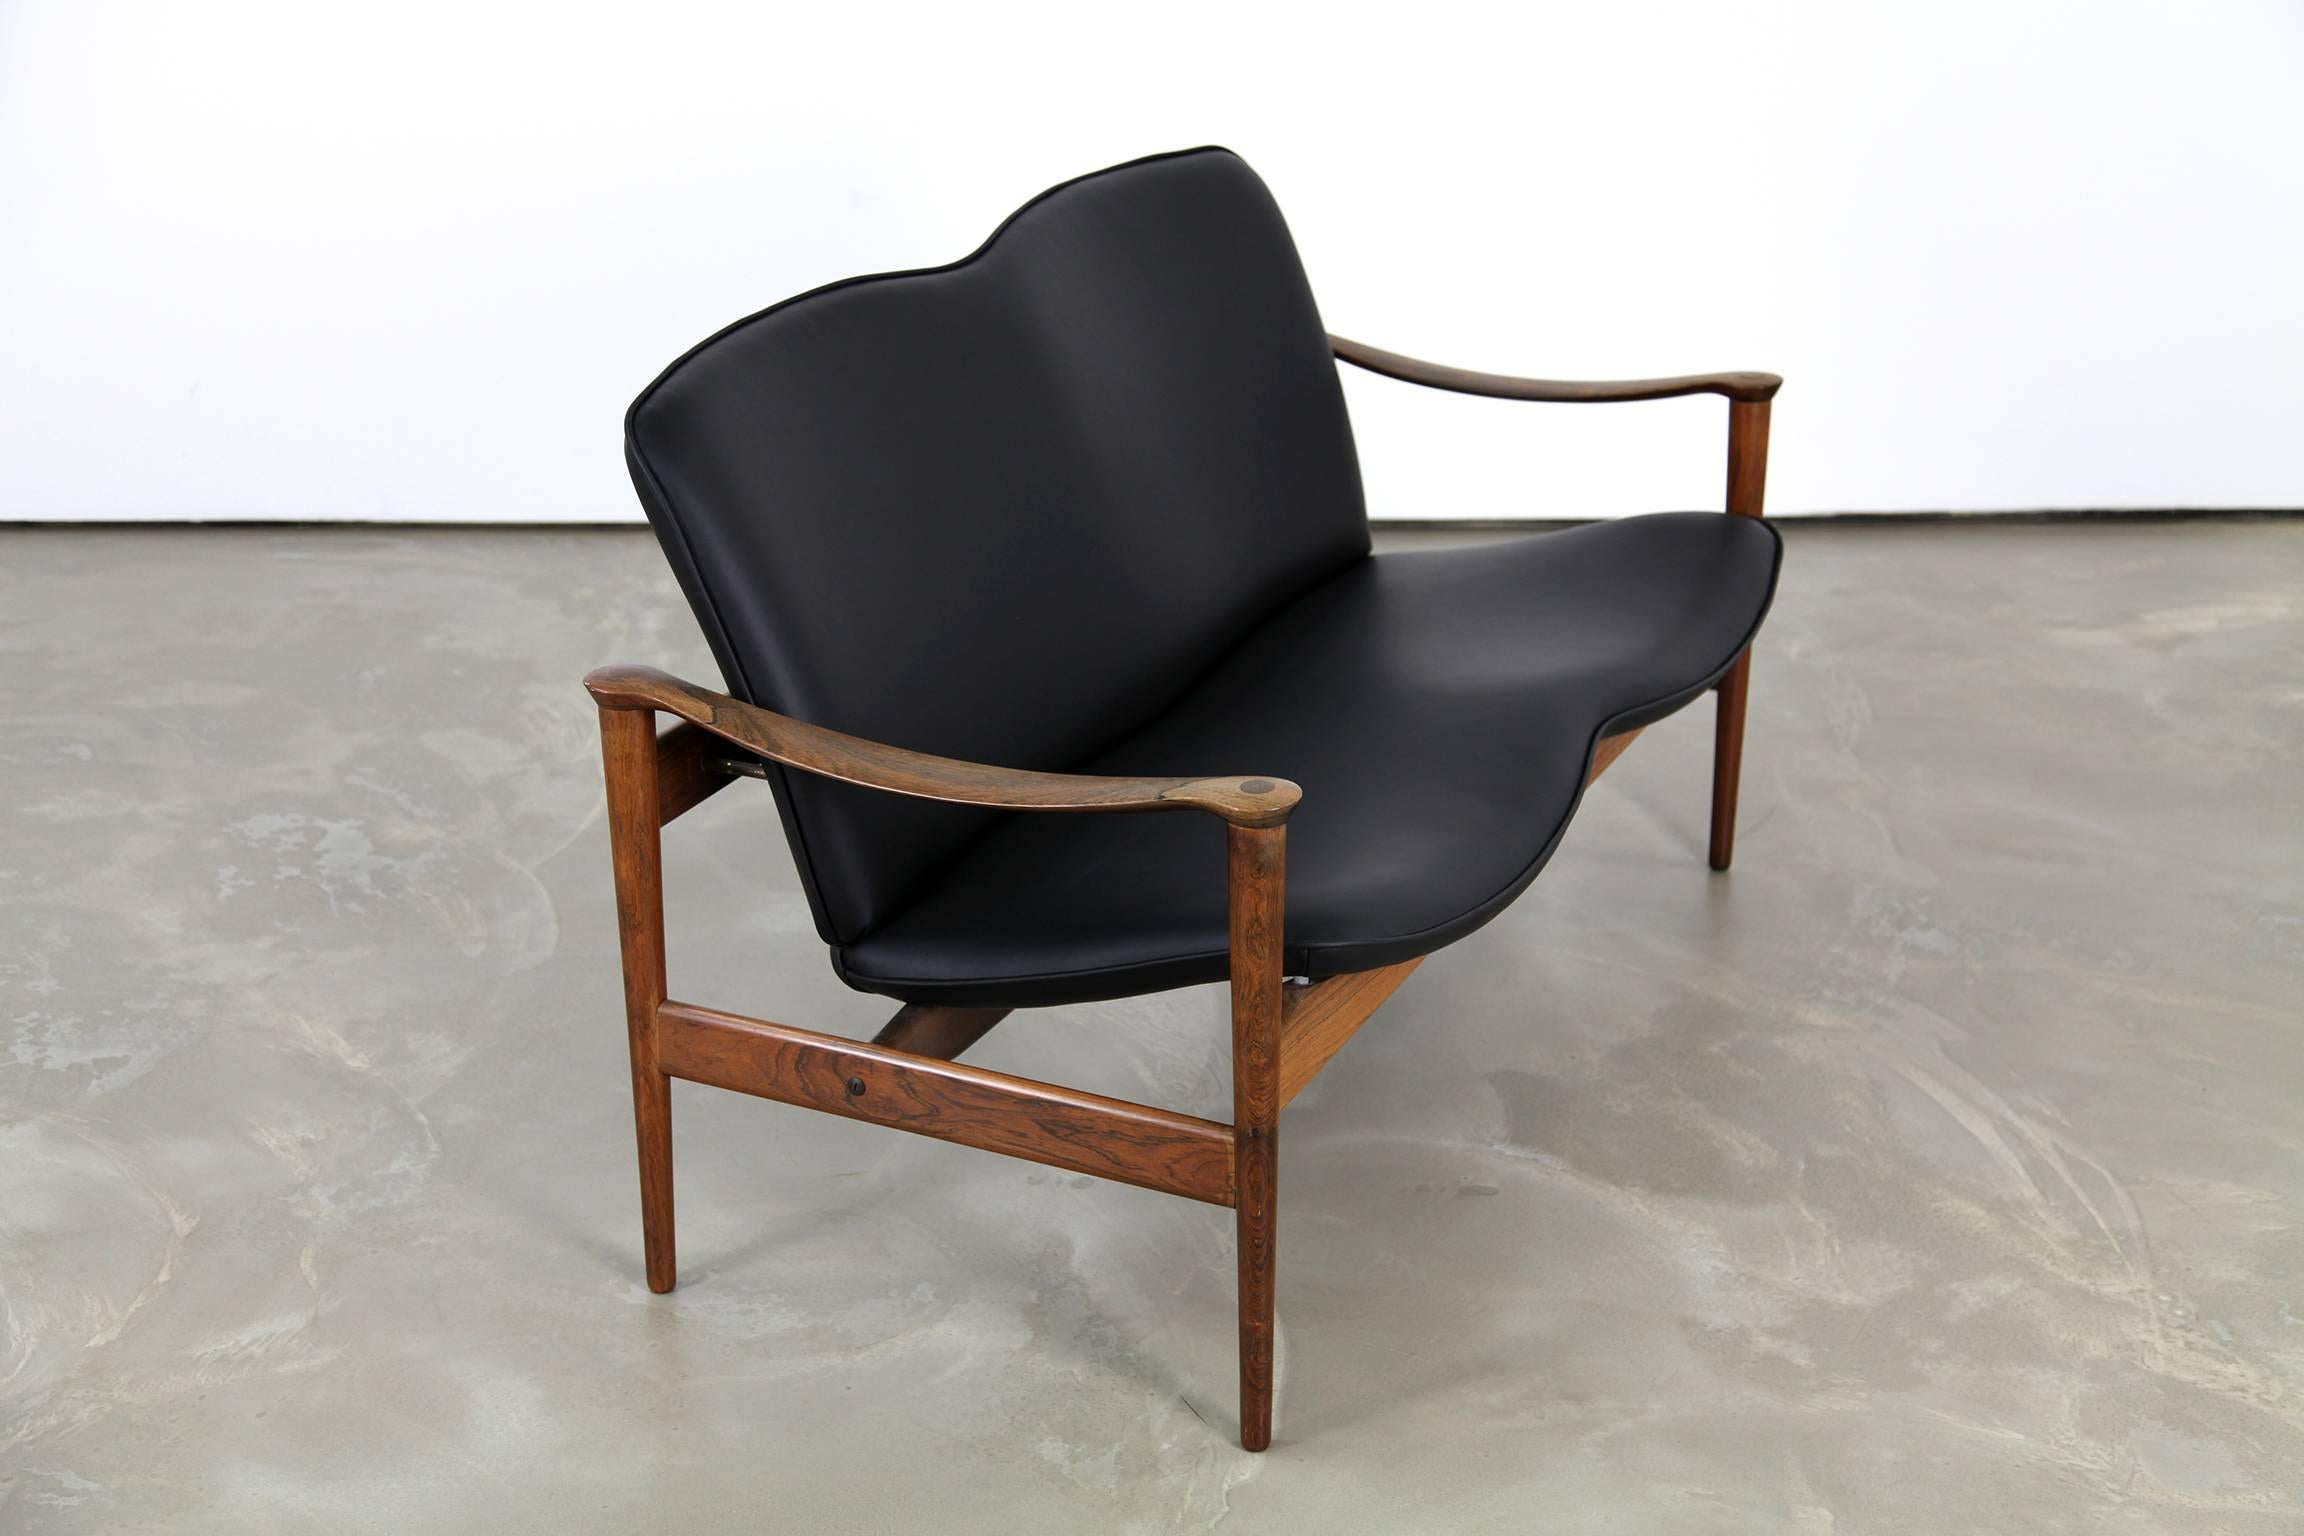 Stunning and extremely rare two-seat sofa, designed by Frederik A. Kayser, produced by Vatne in the early 1960s. The frame is made of rosewood, seat and back are upholstered with black leather.
 